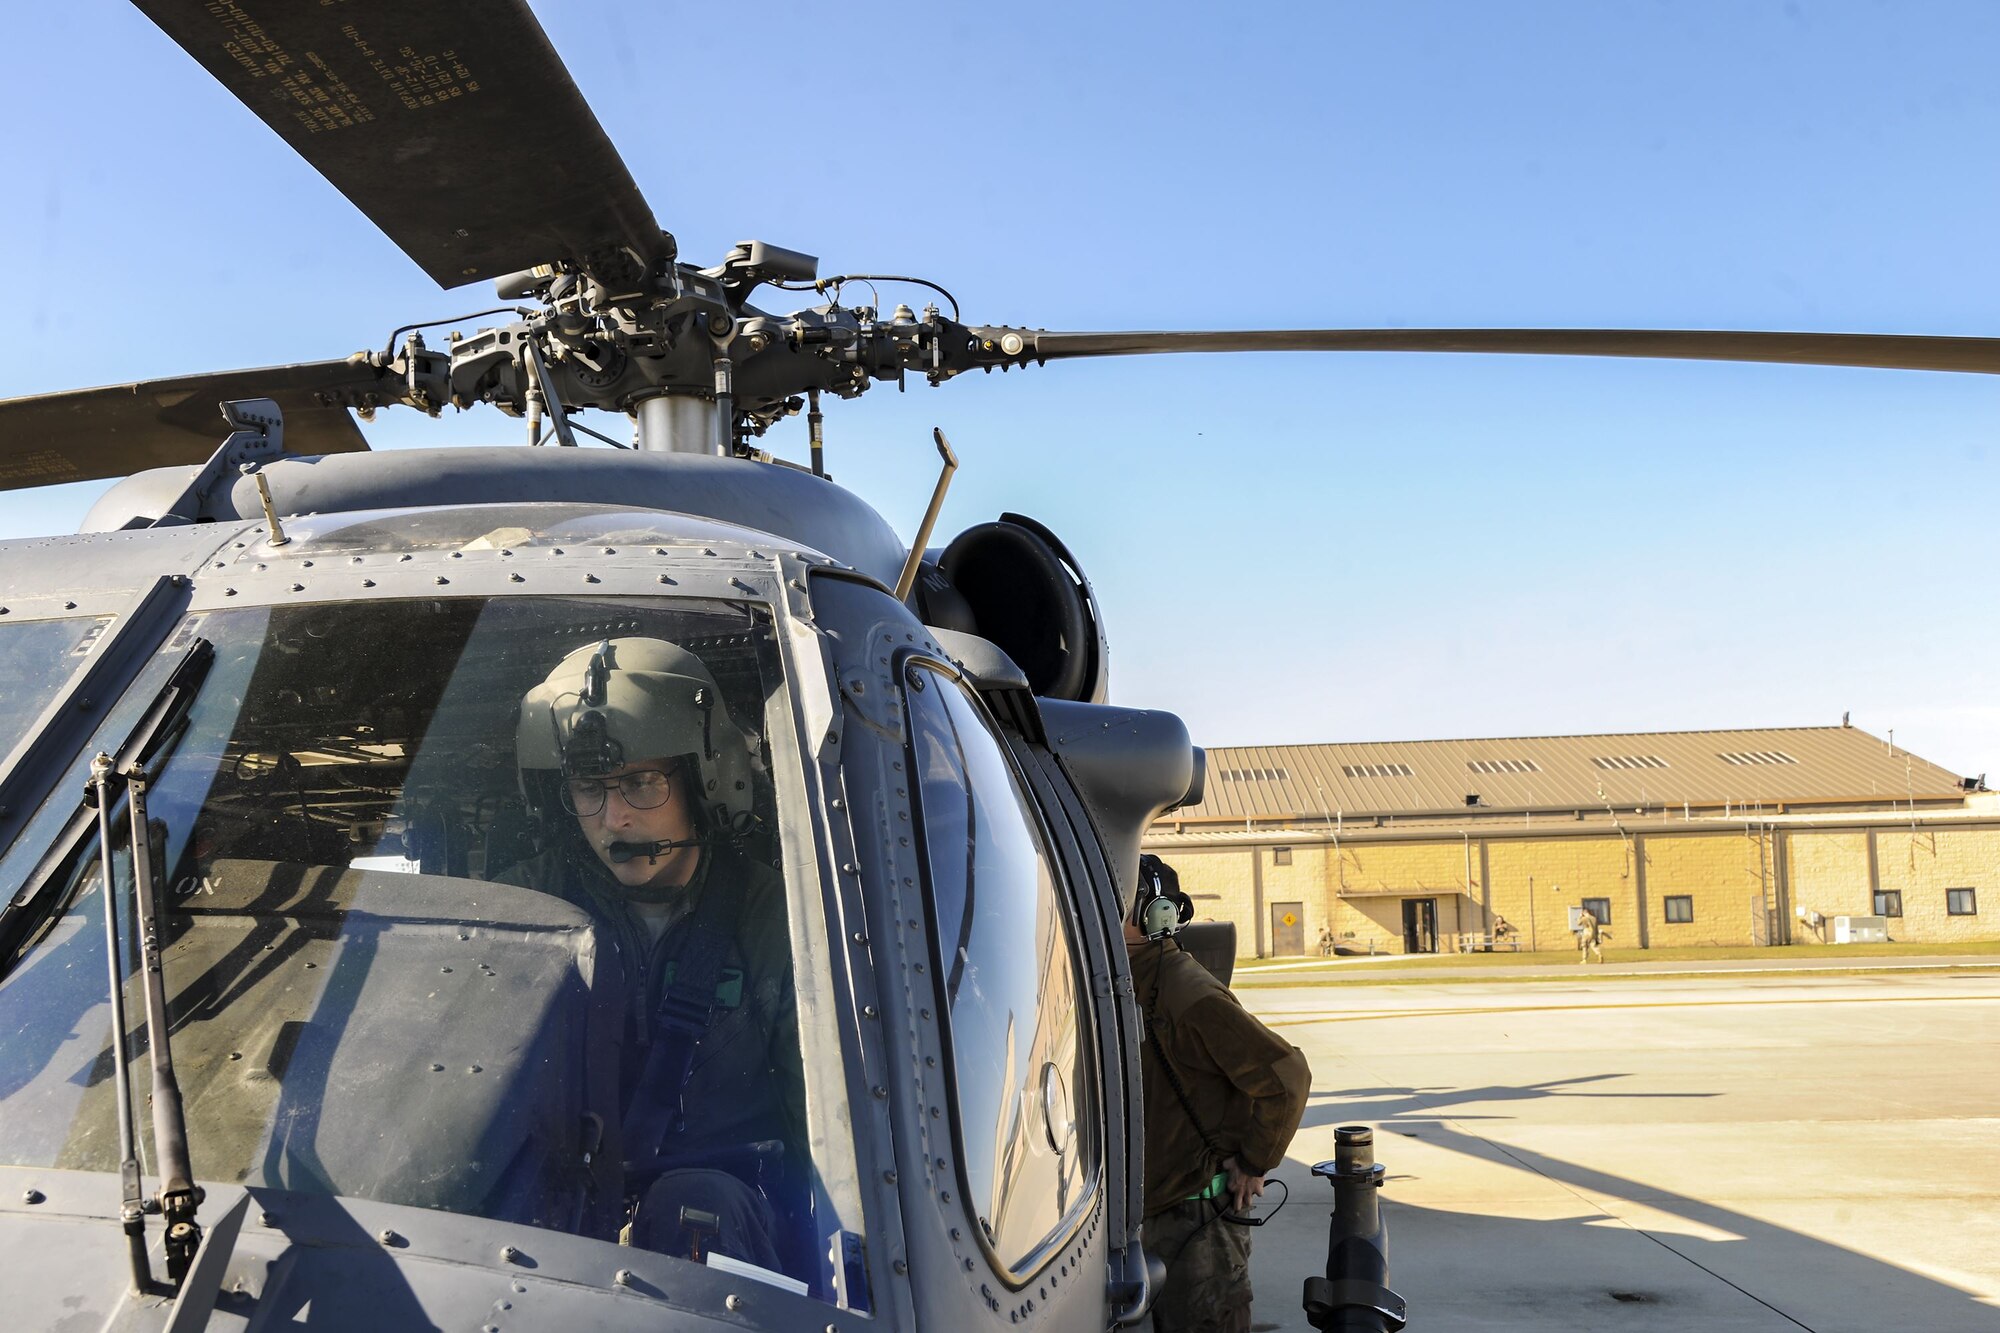 A pilot prepares to power down an HH-60G Pave Hawk following a hover test, Dec. 5, 2017, at Moody Air Force Base, Ga. As part of a Phase 1, Phase 2 exercise, the 23d Wing is evaluating its operations, maintenance and logistics to determine its readiness to rapidly deploy. The HH-60’s capabilities were tested to determine the 723d Aircraft Maintenance Squadron’s ability to make a helicopter operational. (U.S. Air Force photo by Airman Eugene Oliver)